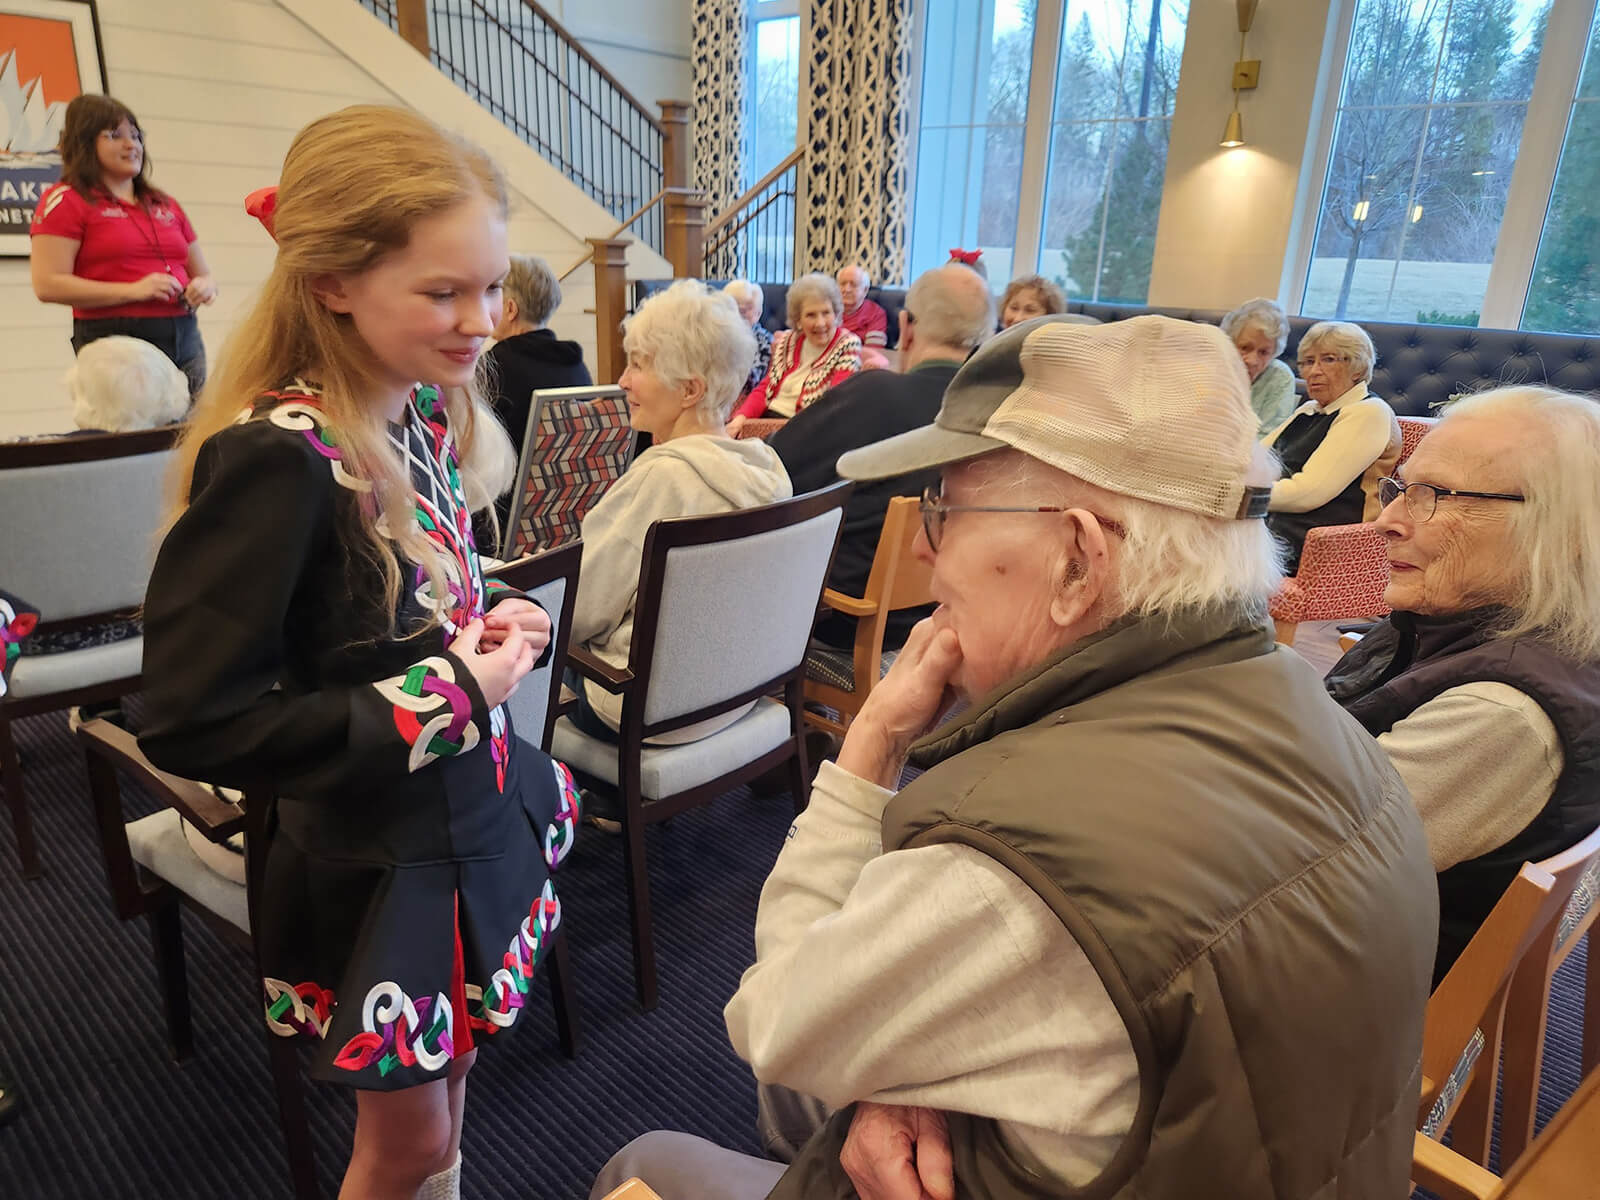 A heartwarming intergenerational interaction at The Waters of Excelsior, where a young volunteer shares a conversation with an attentive senior resident.